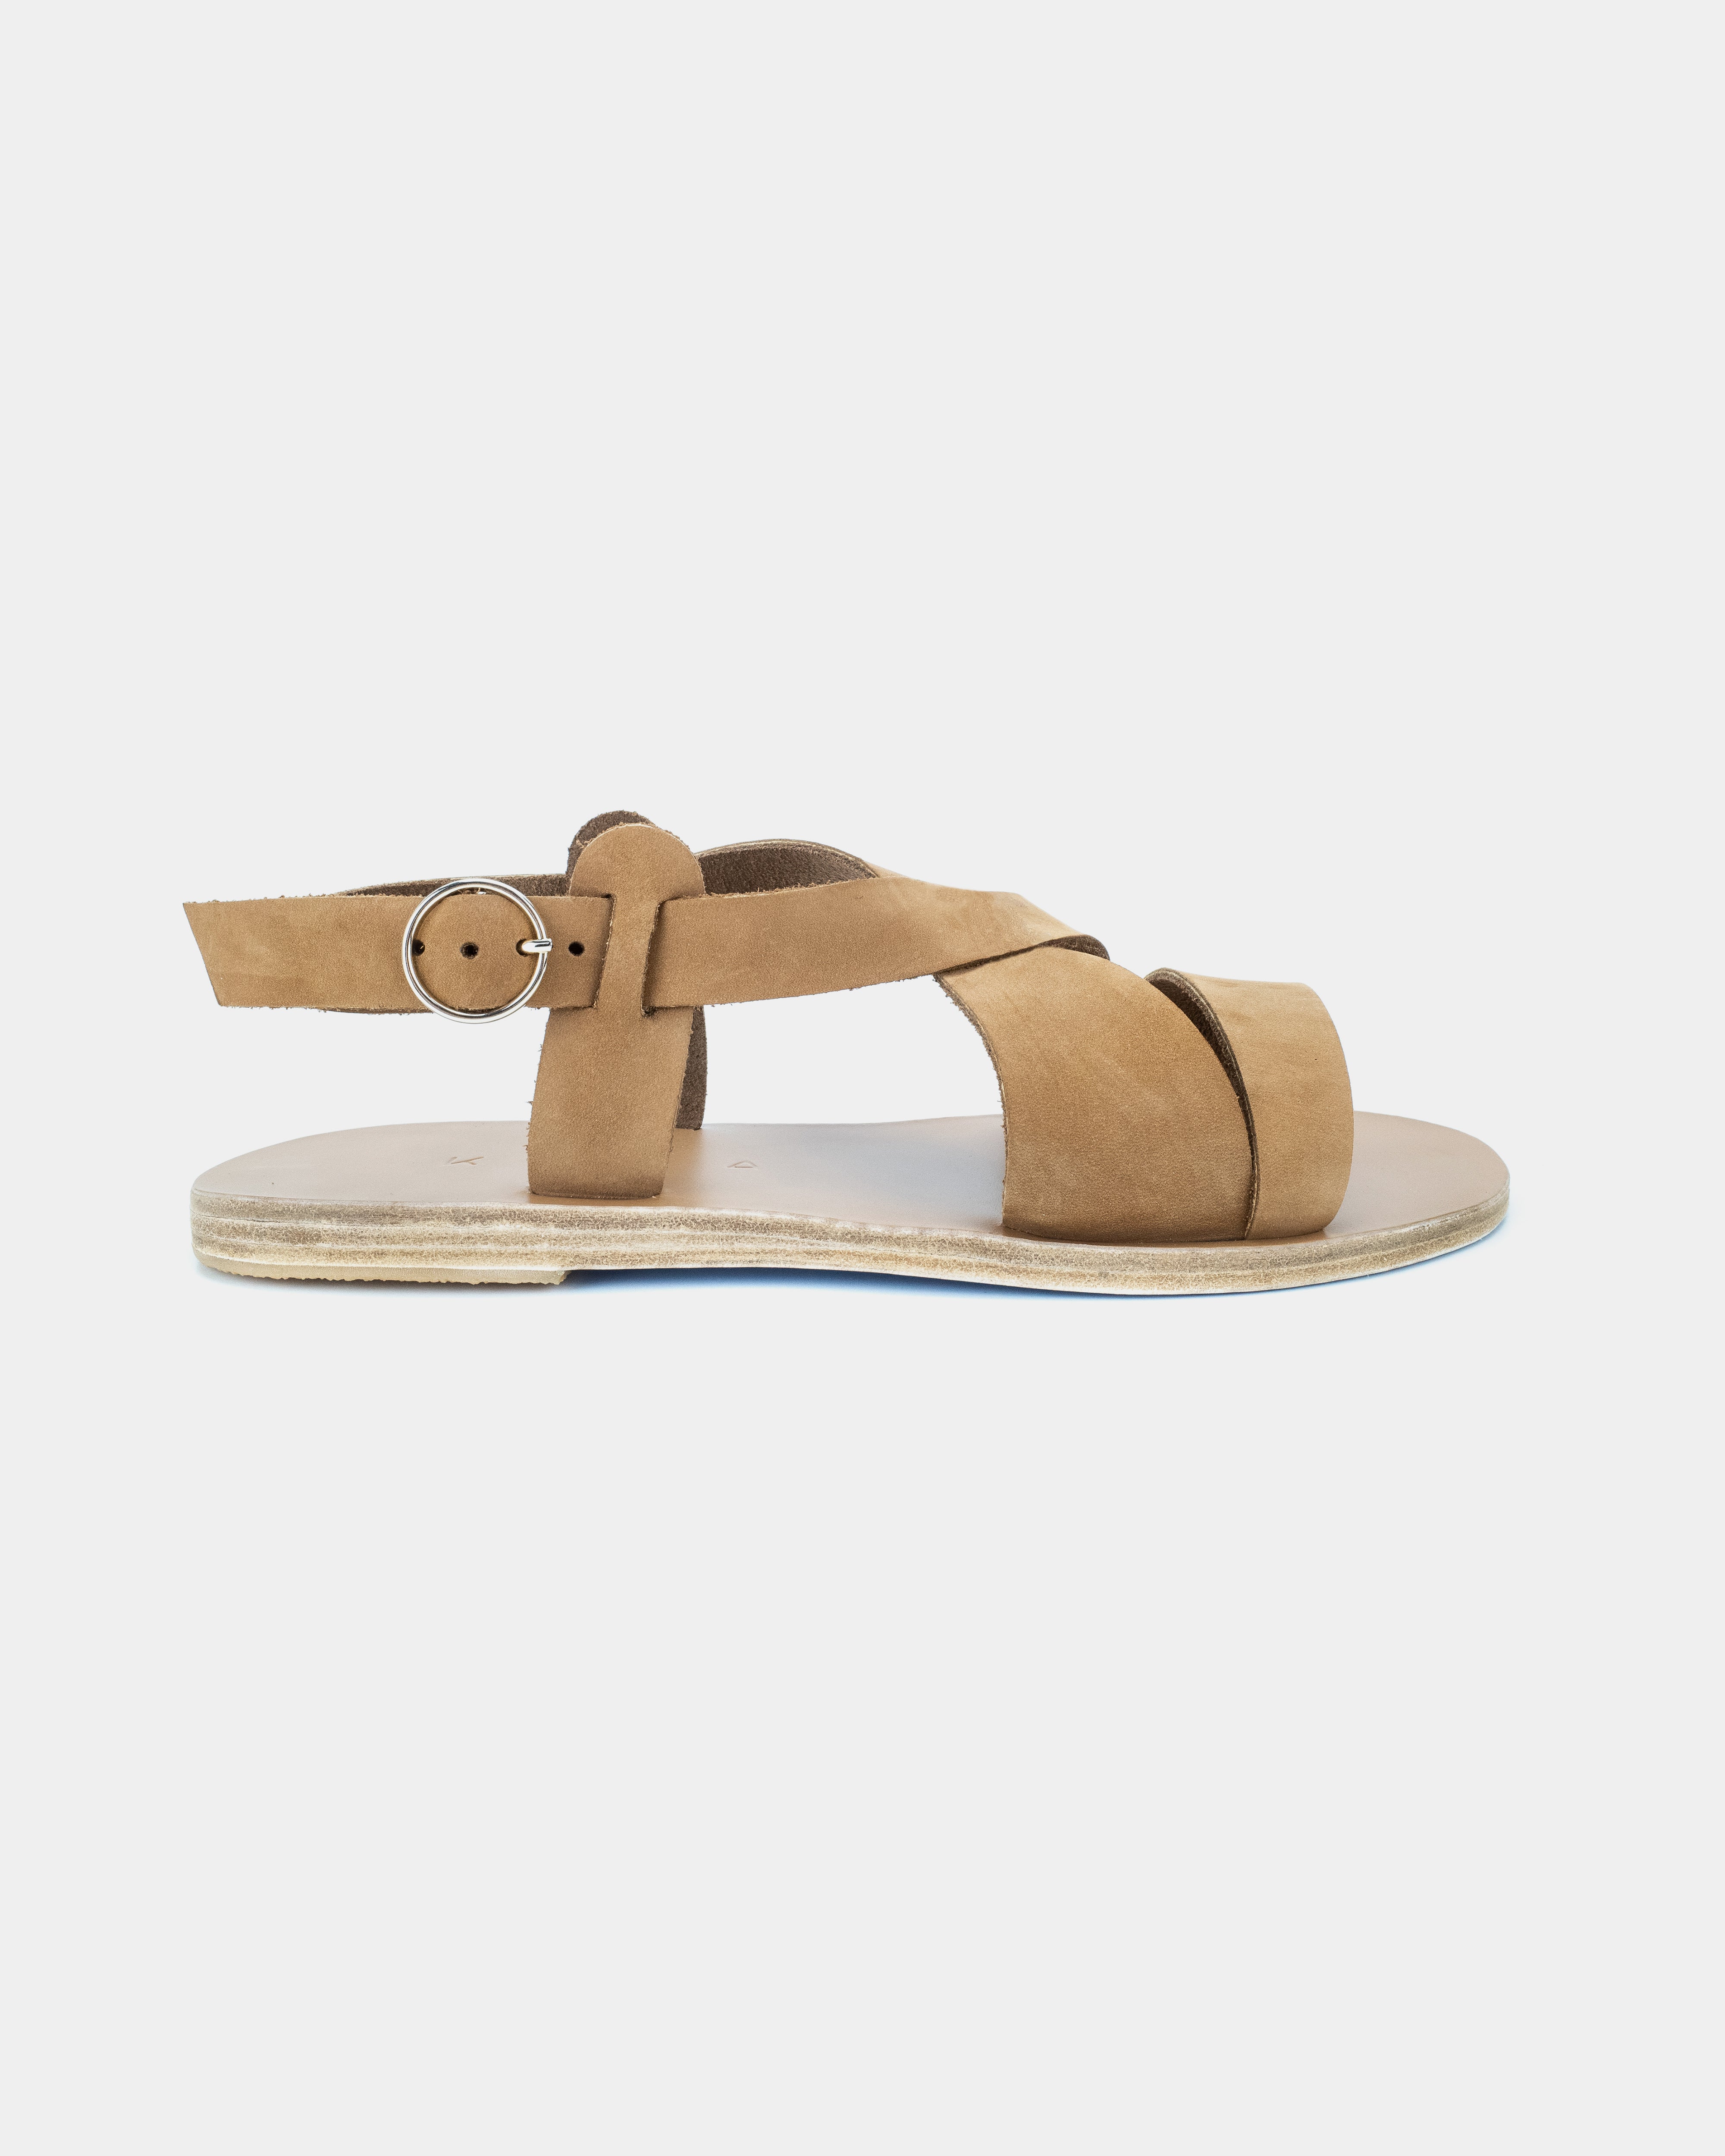 LEATHER STRAPPY SANDALS - Brown | ZARA United States